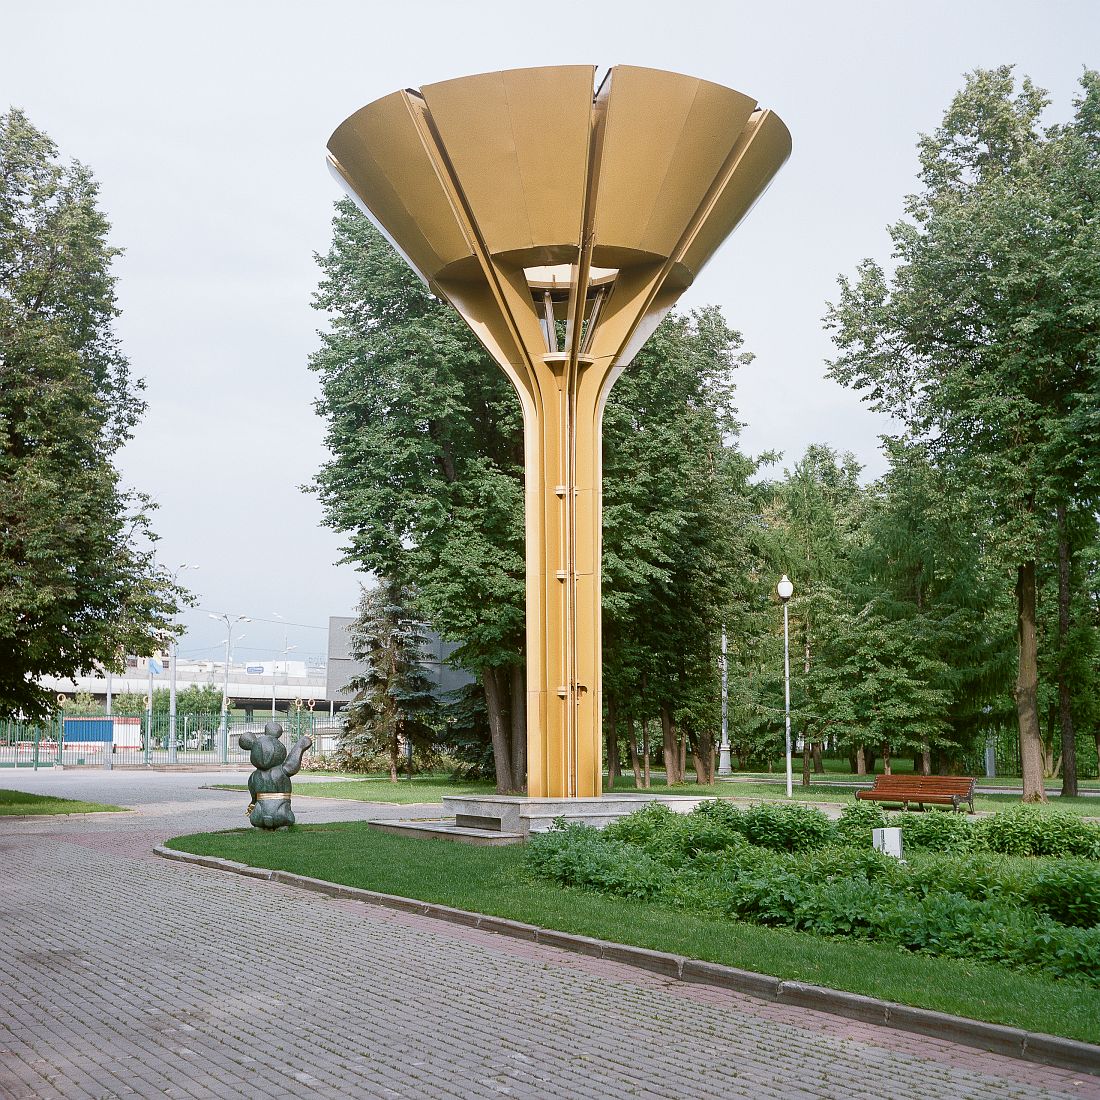 Olympic flame bowl from Grand Arena of Central Lenin Stadium and Misha bear cub, 1980 Summer Olympics mascot installed as a monument in Luzhniki. The Grand Arena of Central Lenin Stadium in Luzhniki built in 1956 and renovated for the 1980 Olympics hosted the opening and the closing ceremonies of Moscow Olympics.